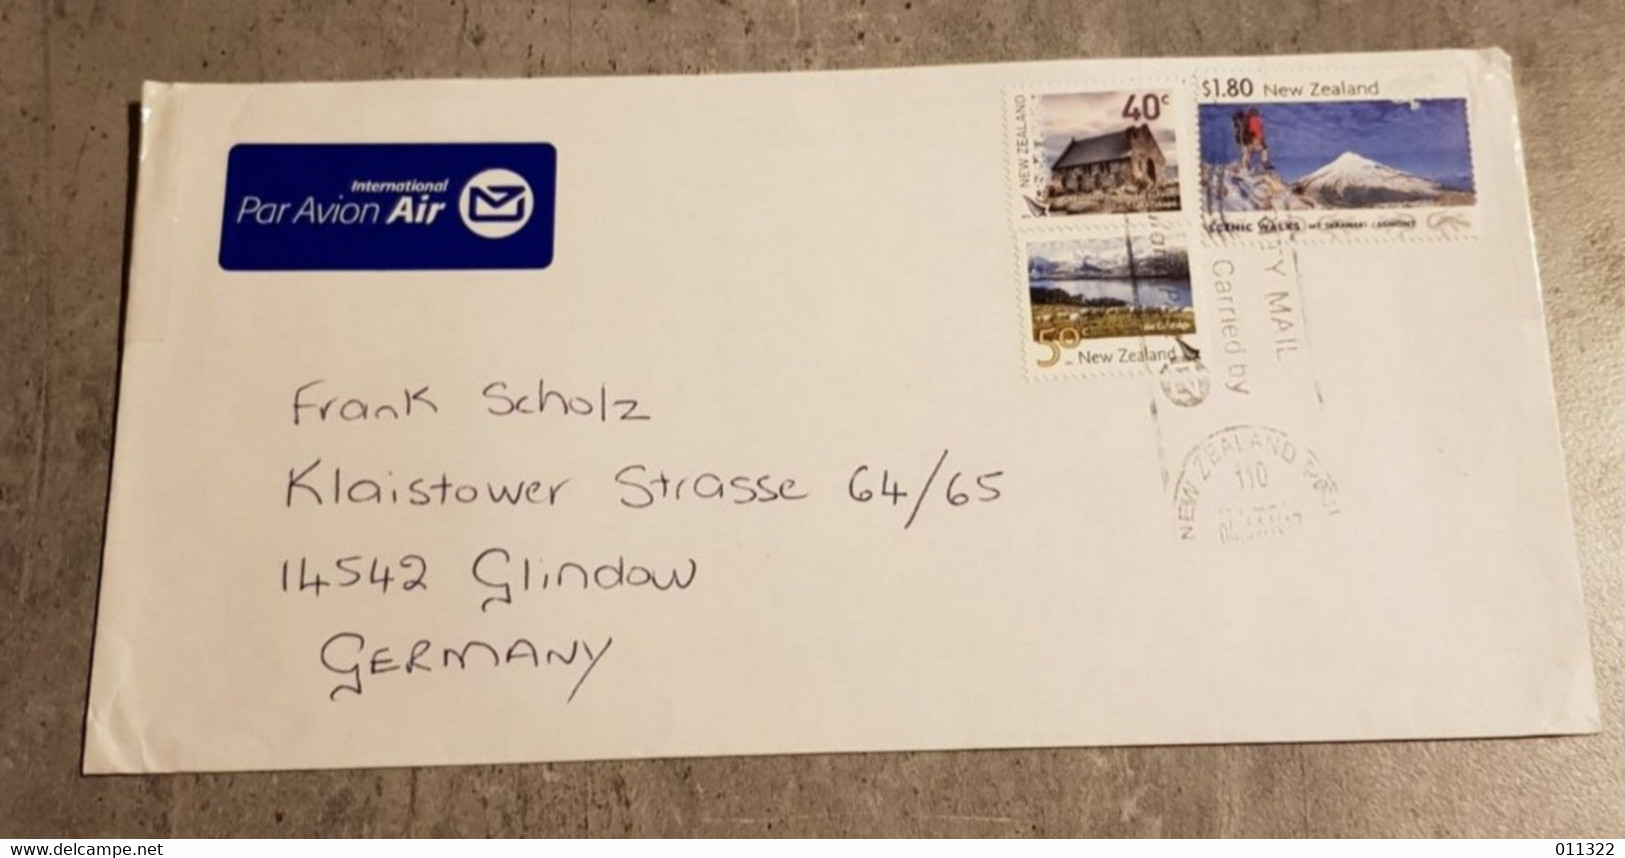 NEW ZEALAND COVER CIRCULED SEND TO GERMANY - Luchtpost